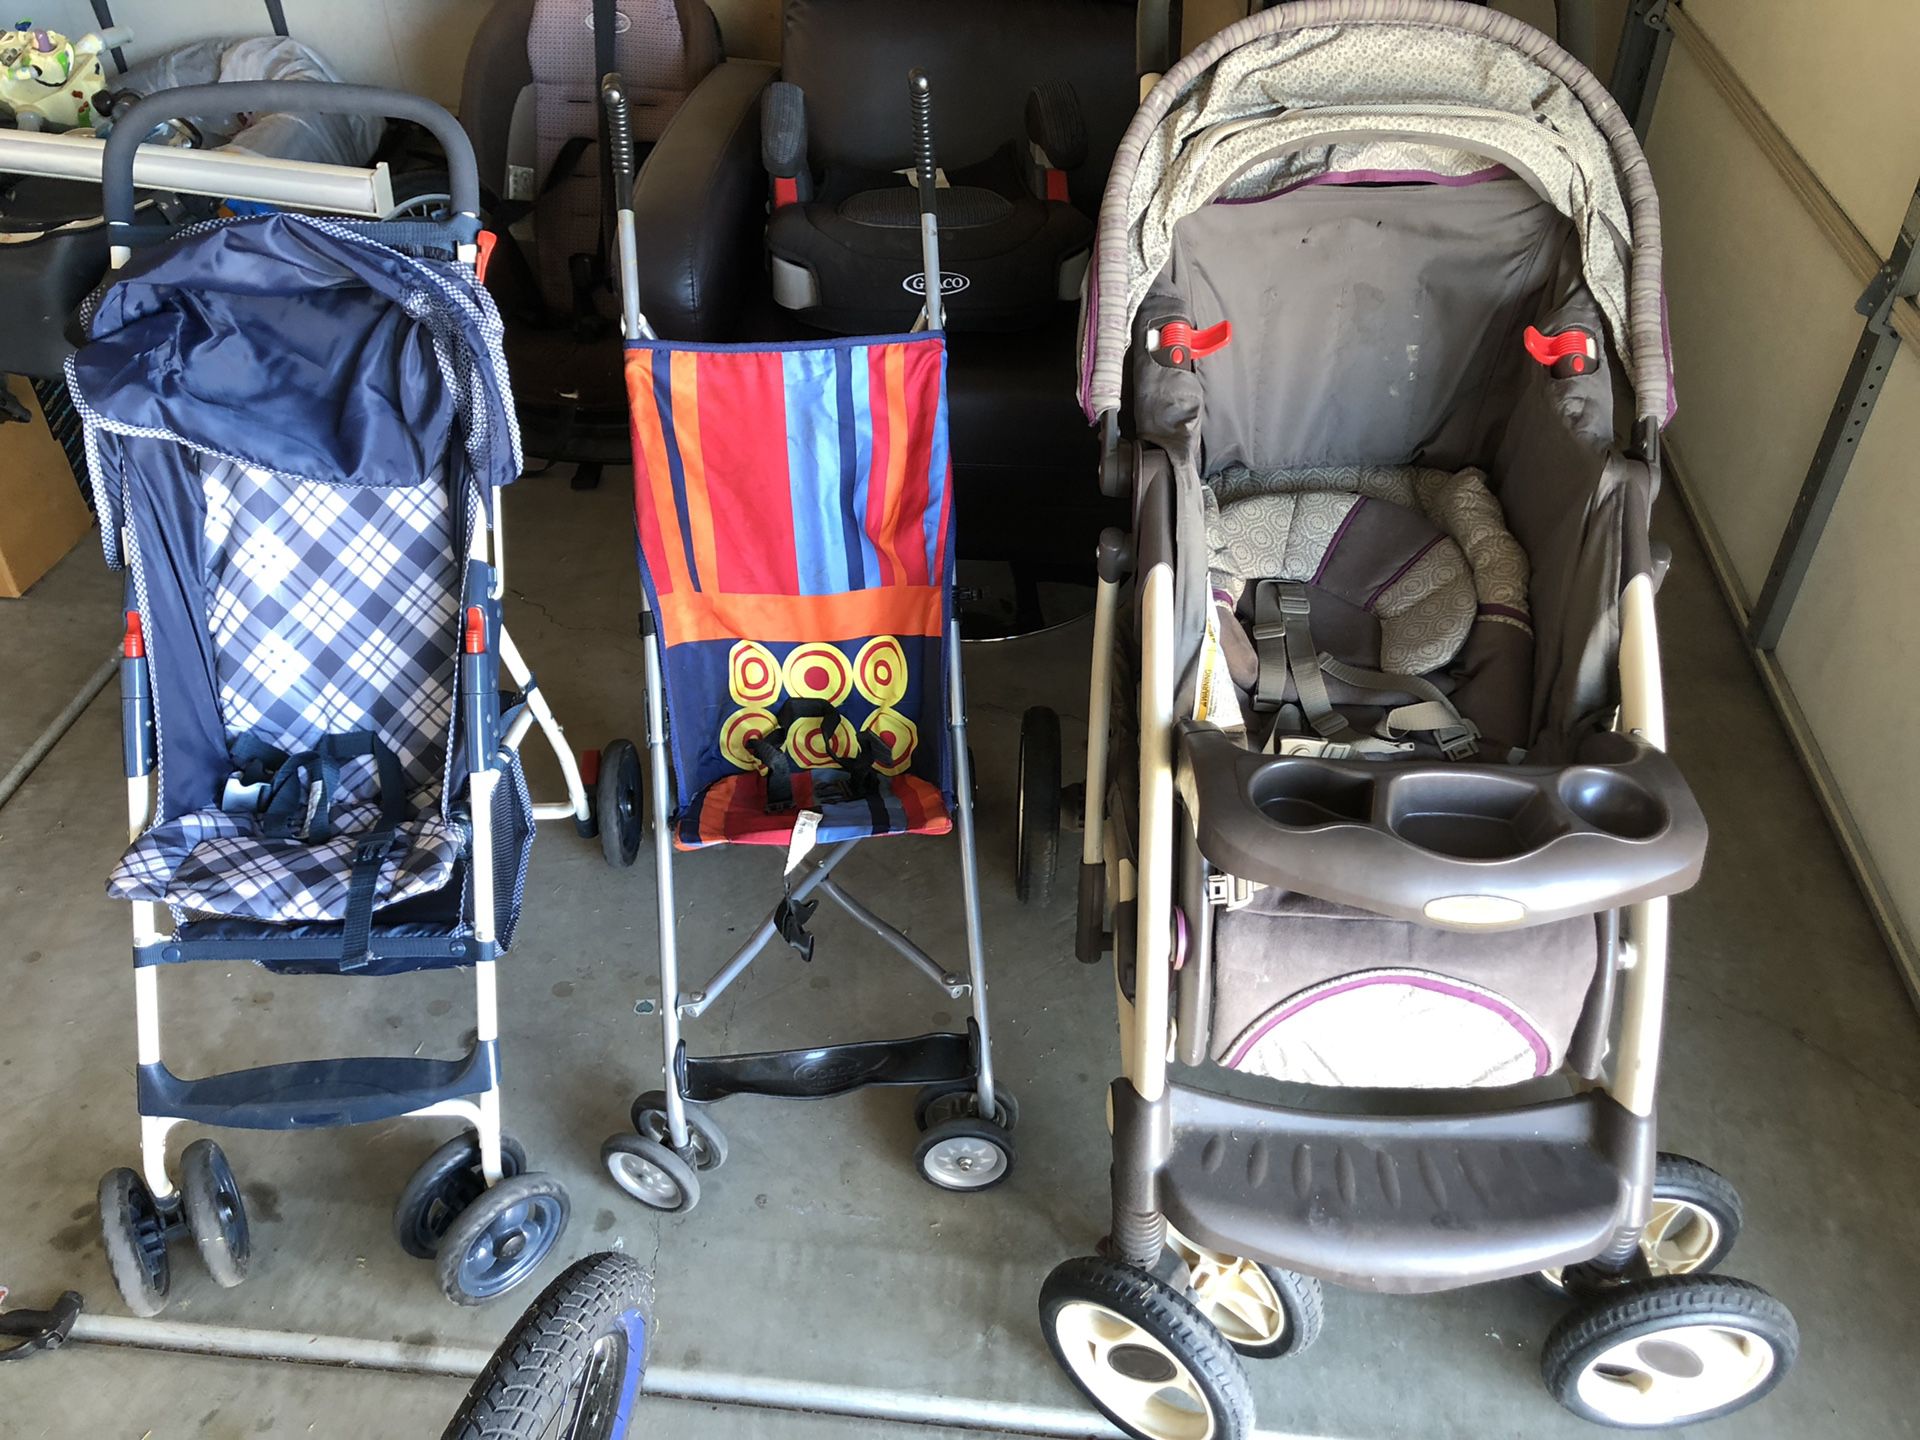 Love seat, booster seat, car seats and strollers